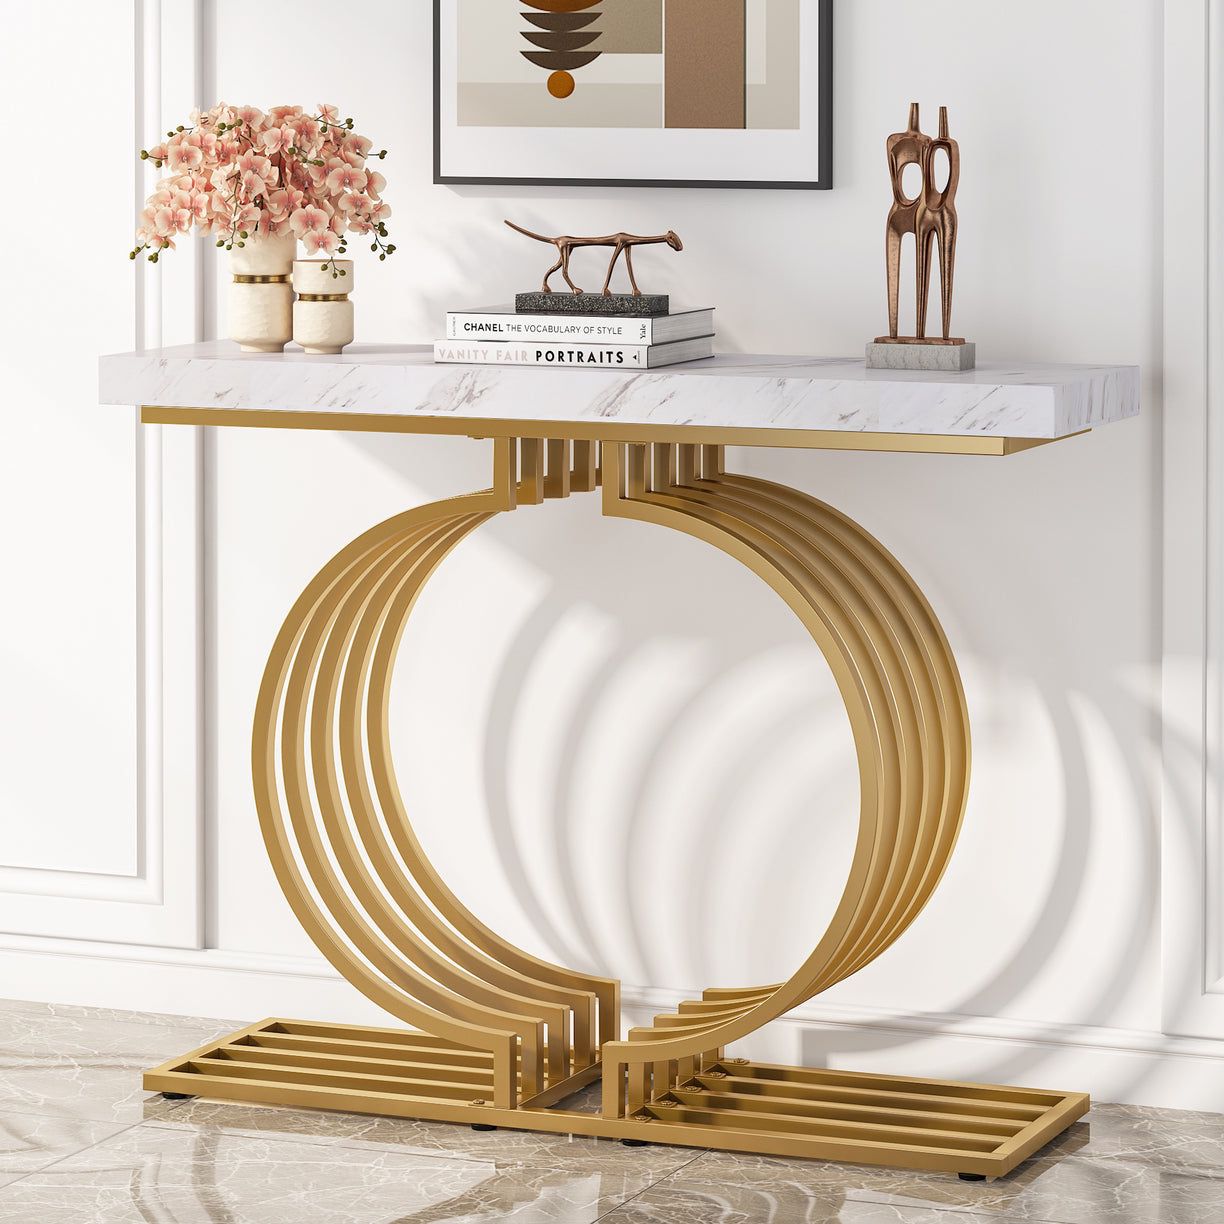 39.37" Console Table, Geometric Entryway Sofa Table with Metal Base